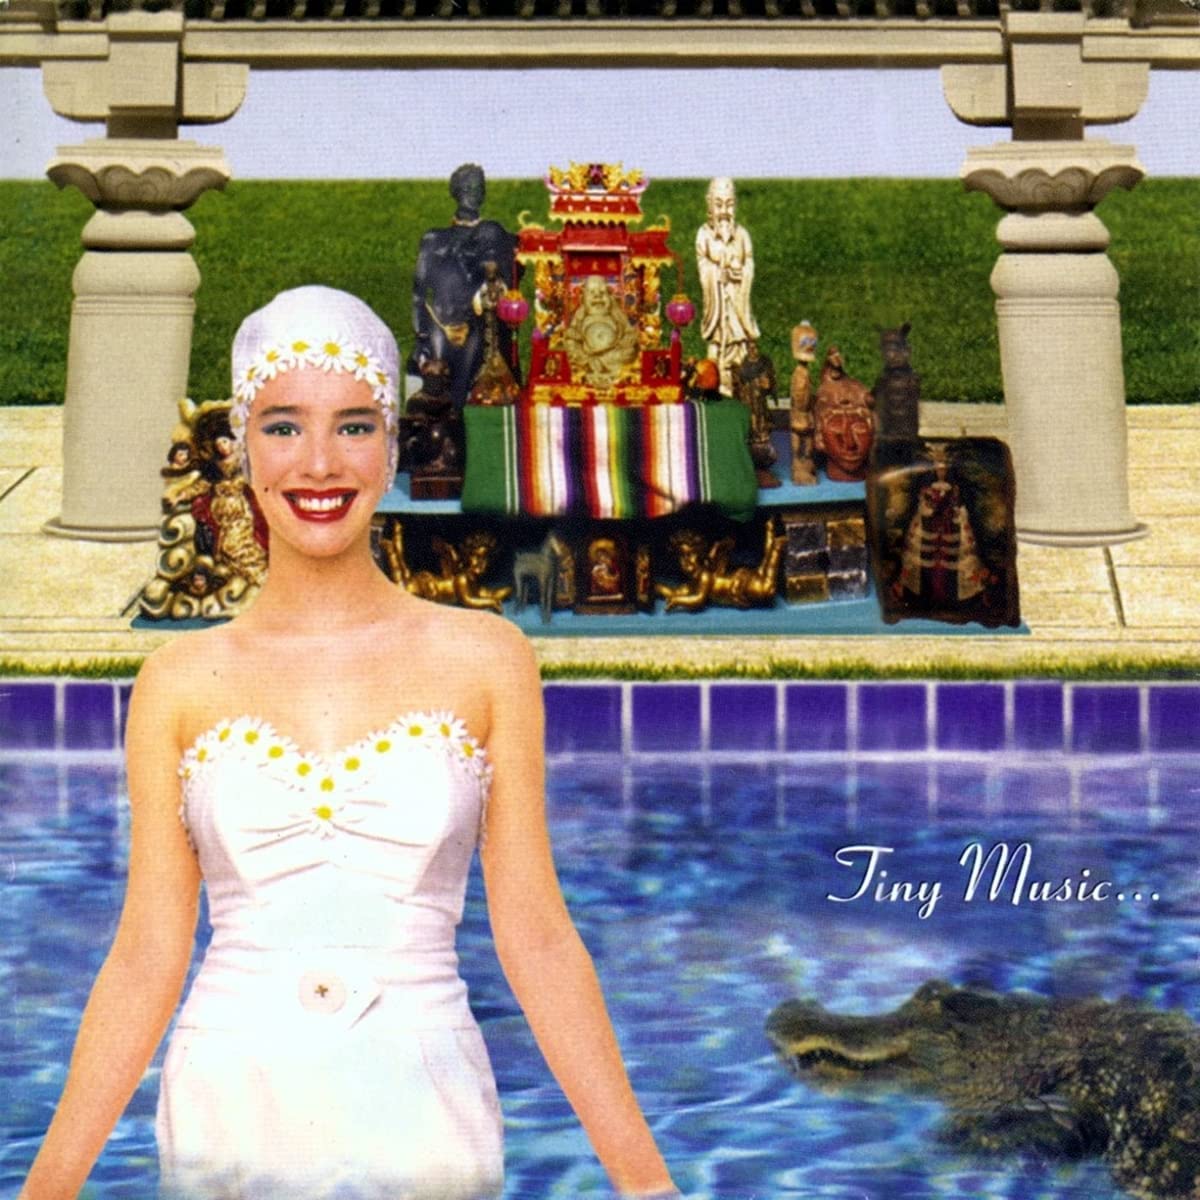 Stone Temple Pilots - Tiny Music... Songs From The Vatican Gift Shop - 2CD